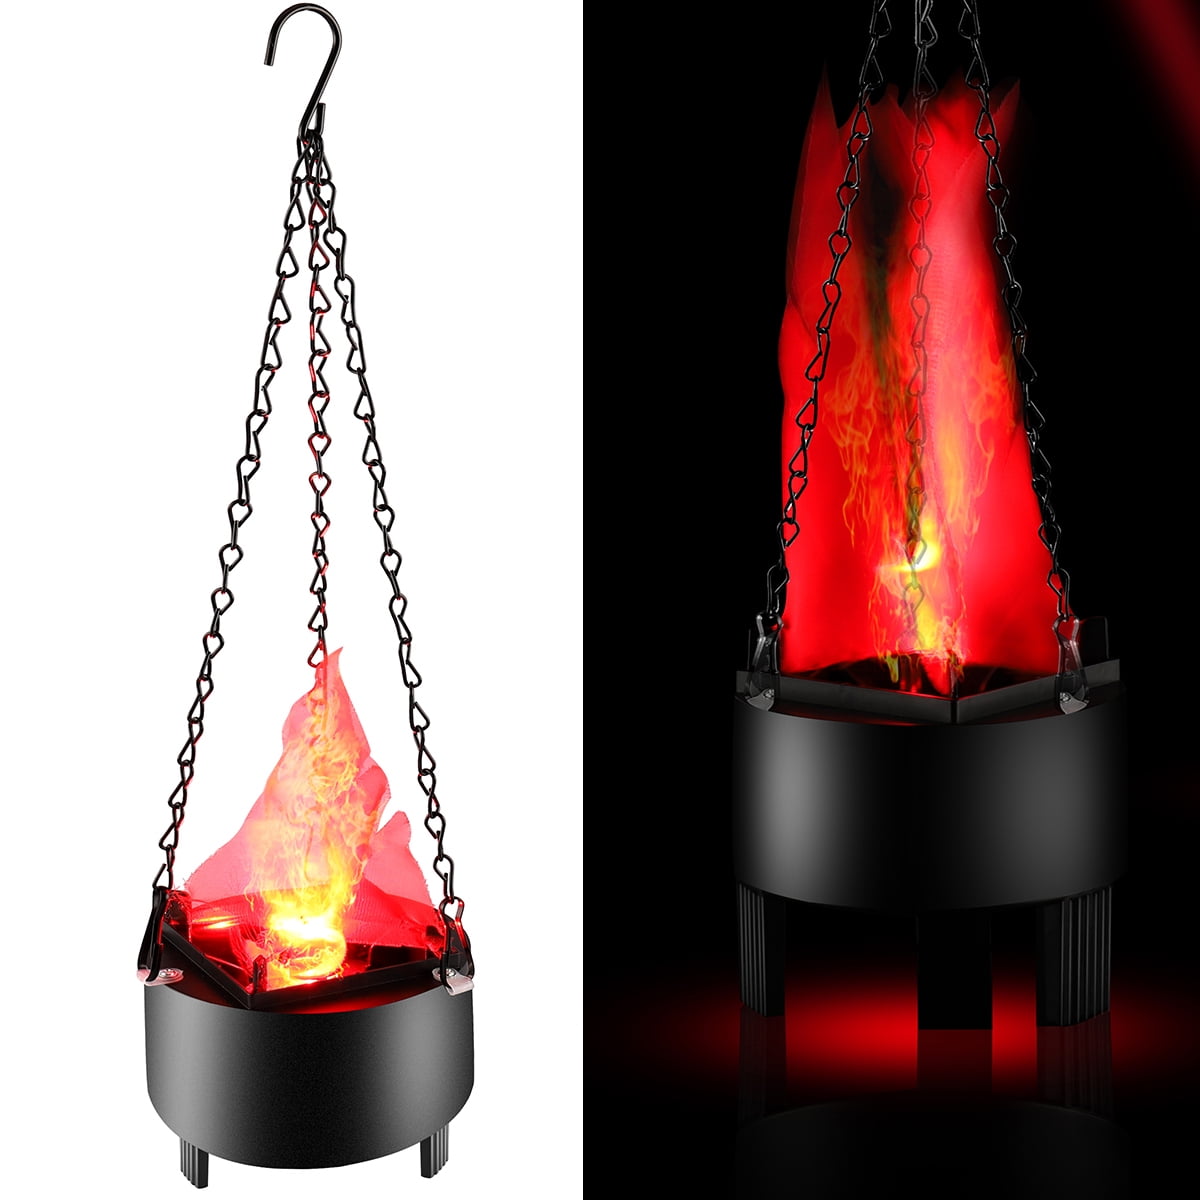 LED Flame Light Dynamic Fire Effect Light Hanging Flame Light Simulated Decorative Atmosphere Lamps Artificial Flame Fake Fire Campfire Centerpiece with No Heat Base for Party Bar Festival Decoration